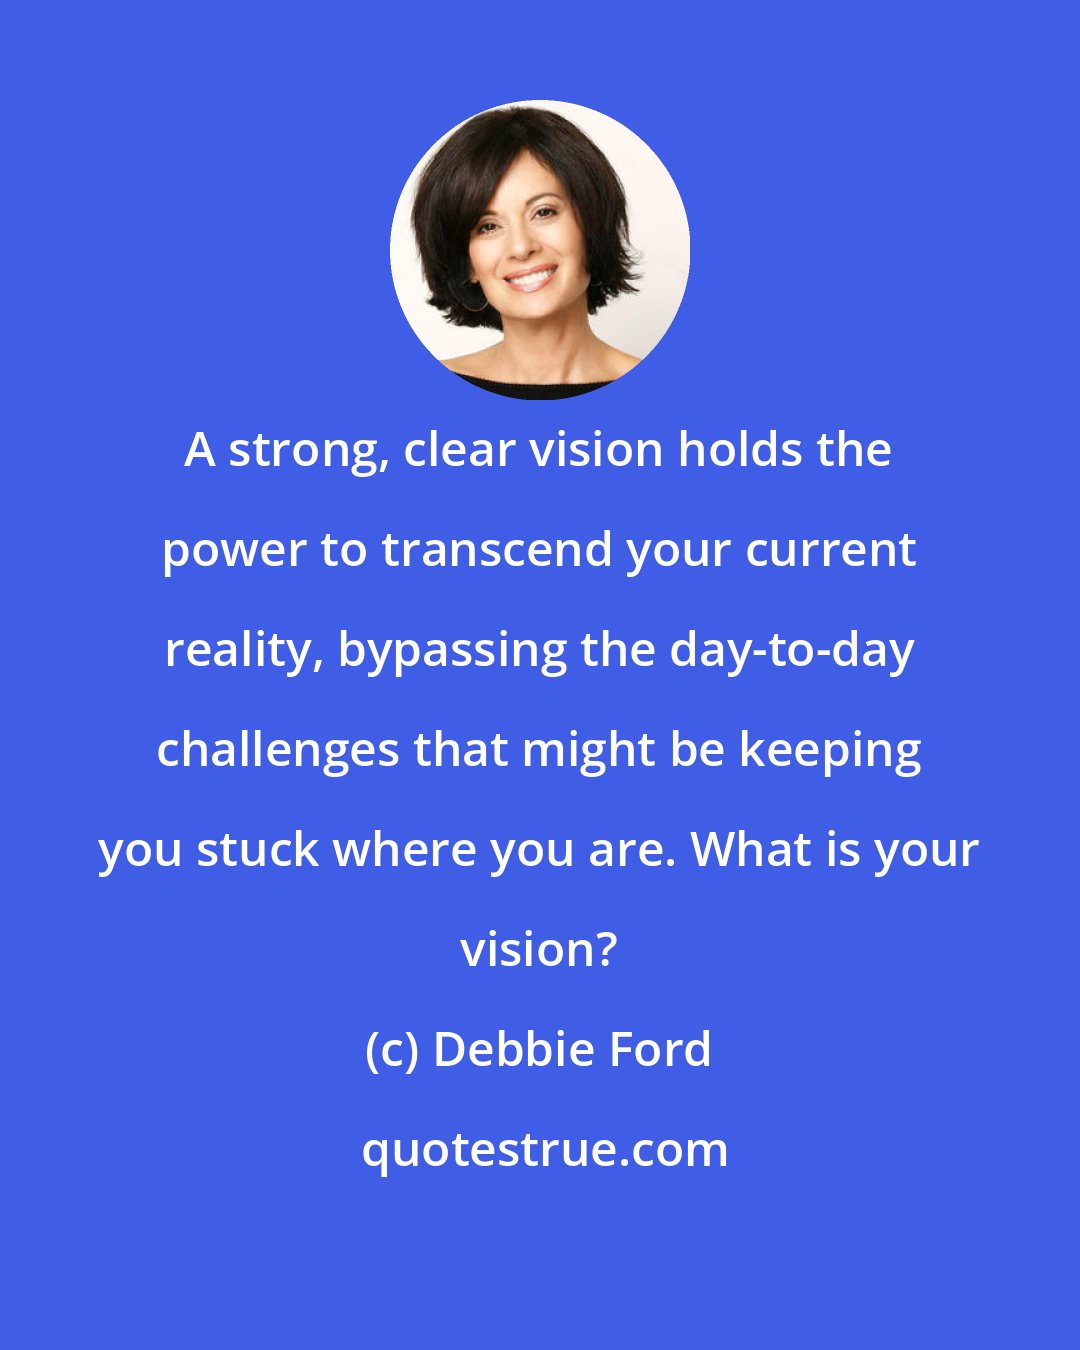 Debbie Ford: A strong, clear vision holds the power to transcend your current reality, bypassing the day-to-day challenges that might be keeping you stuck where you are. What is your vision?